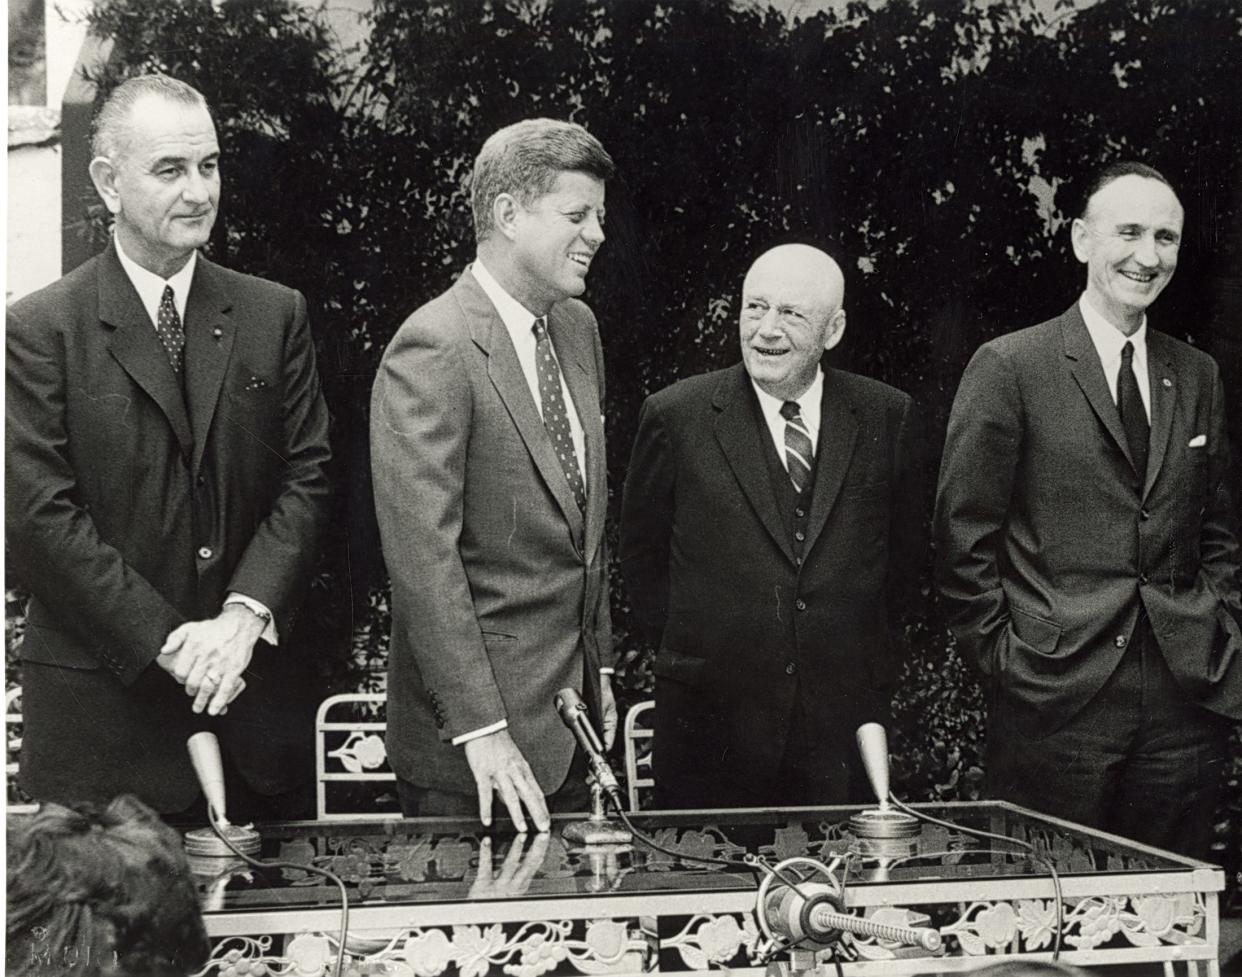 Vice President Lyndon Johnson (far left) during a 1960 press conference with JFK in Palm Beach.